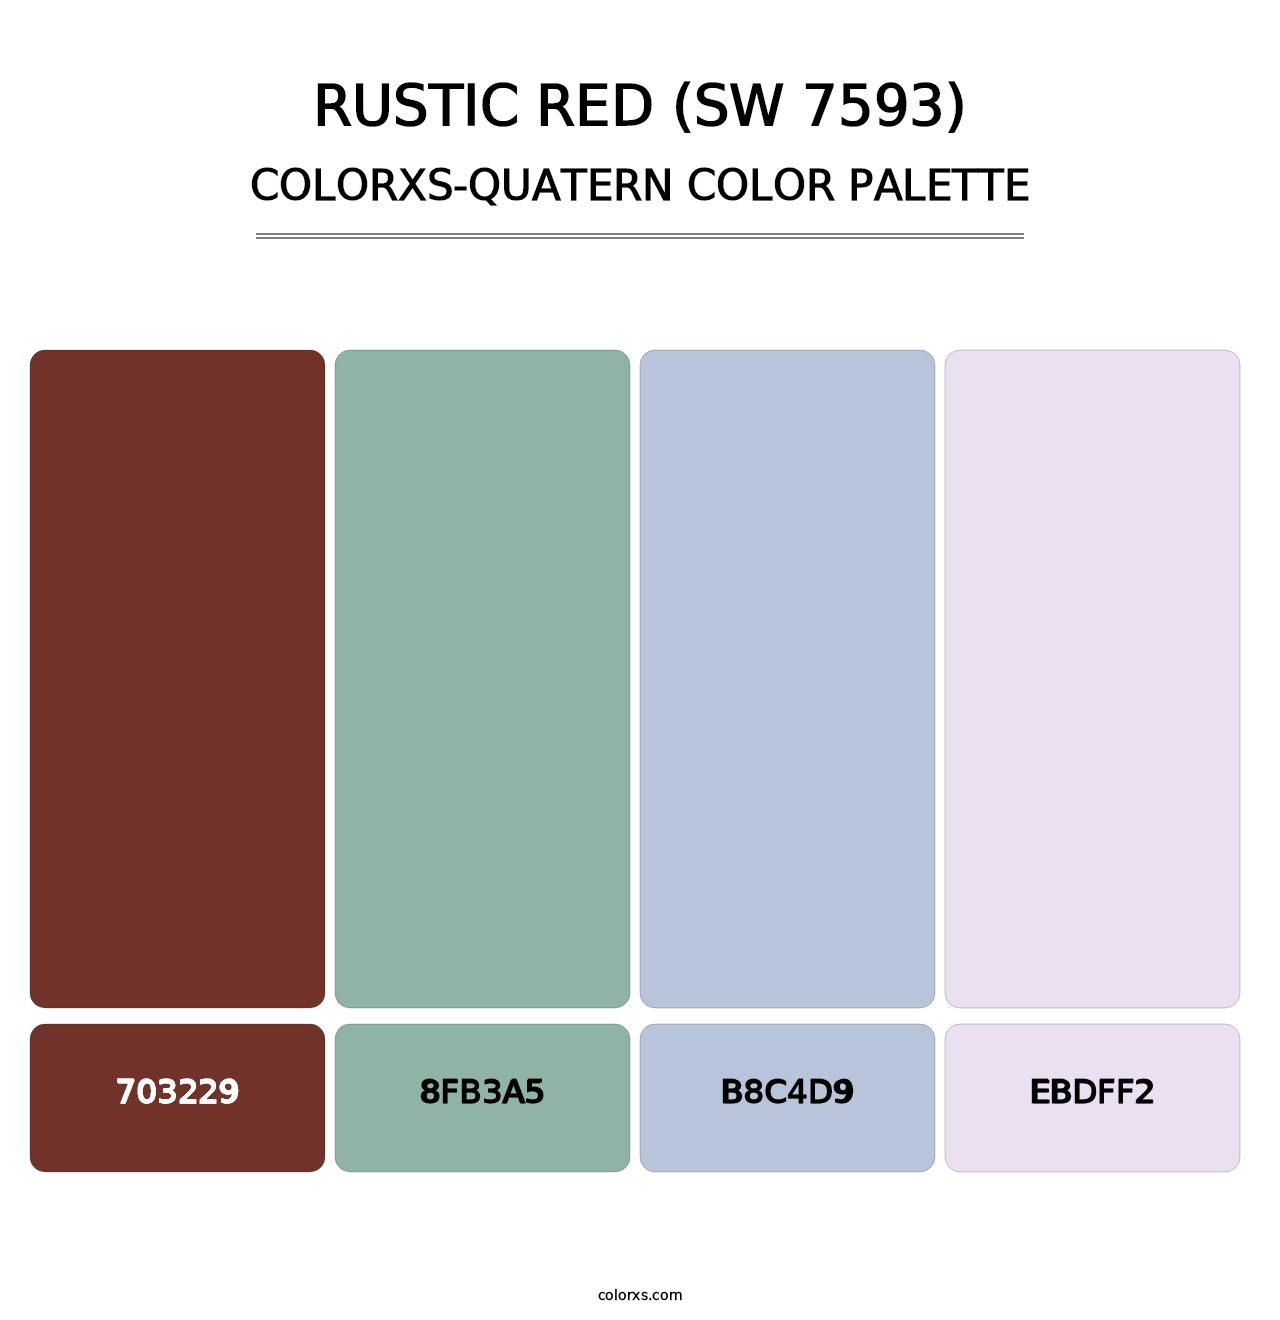 Rustic Red (SW 7593) - Colorxs Quatern Palette